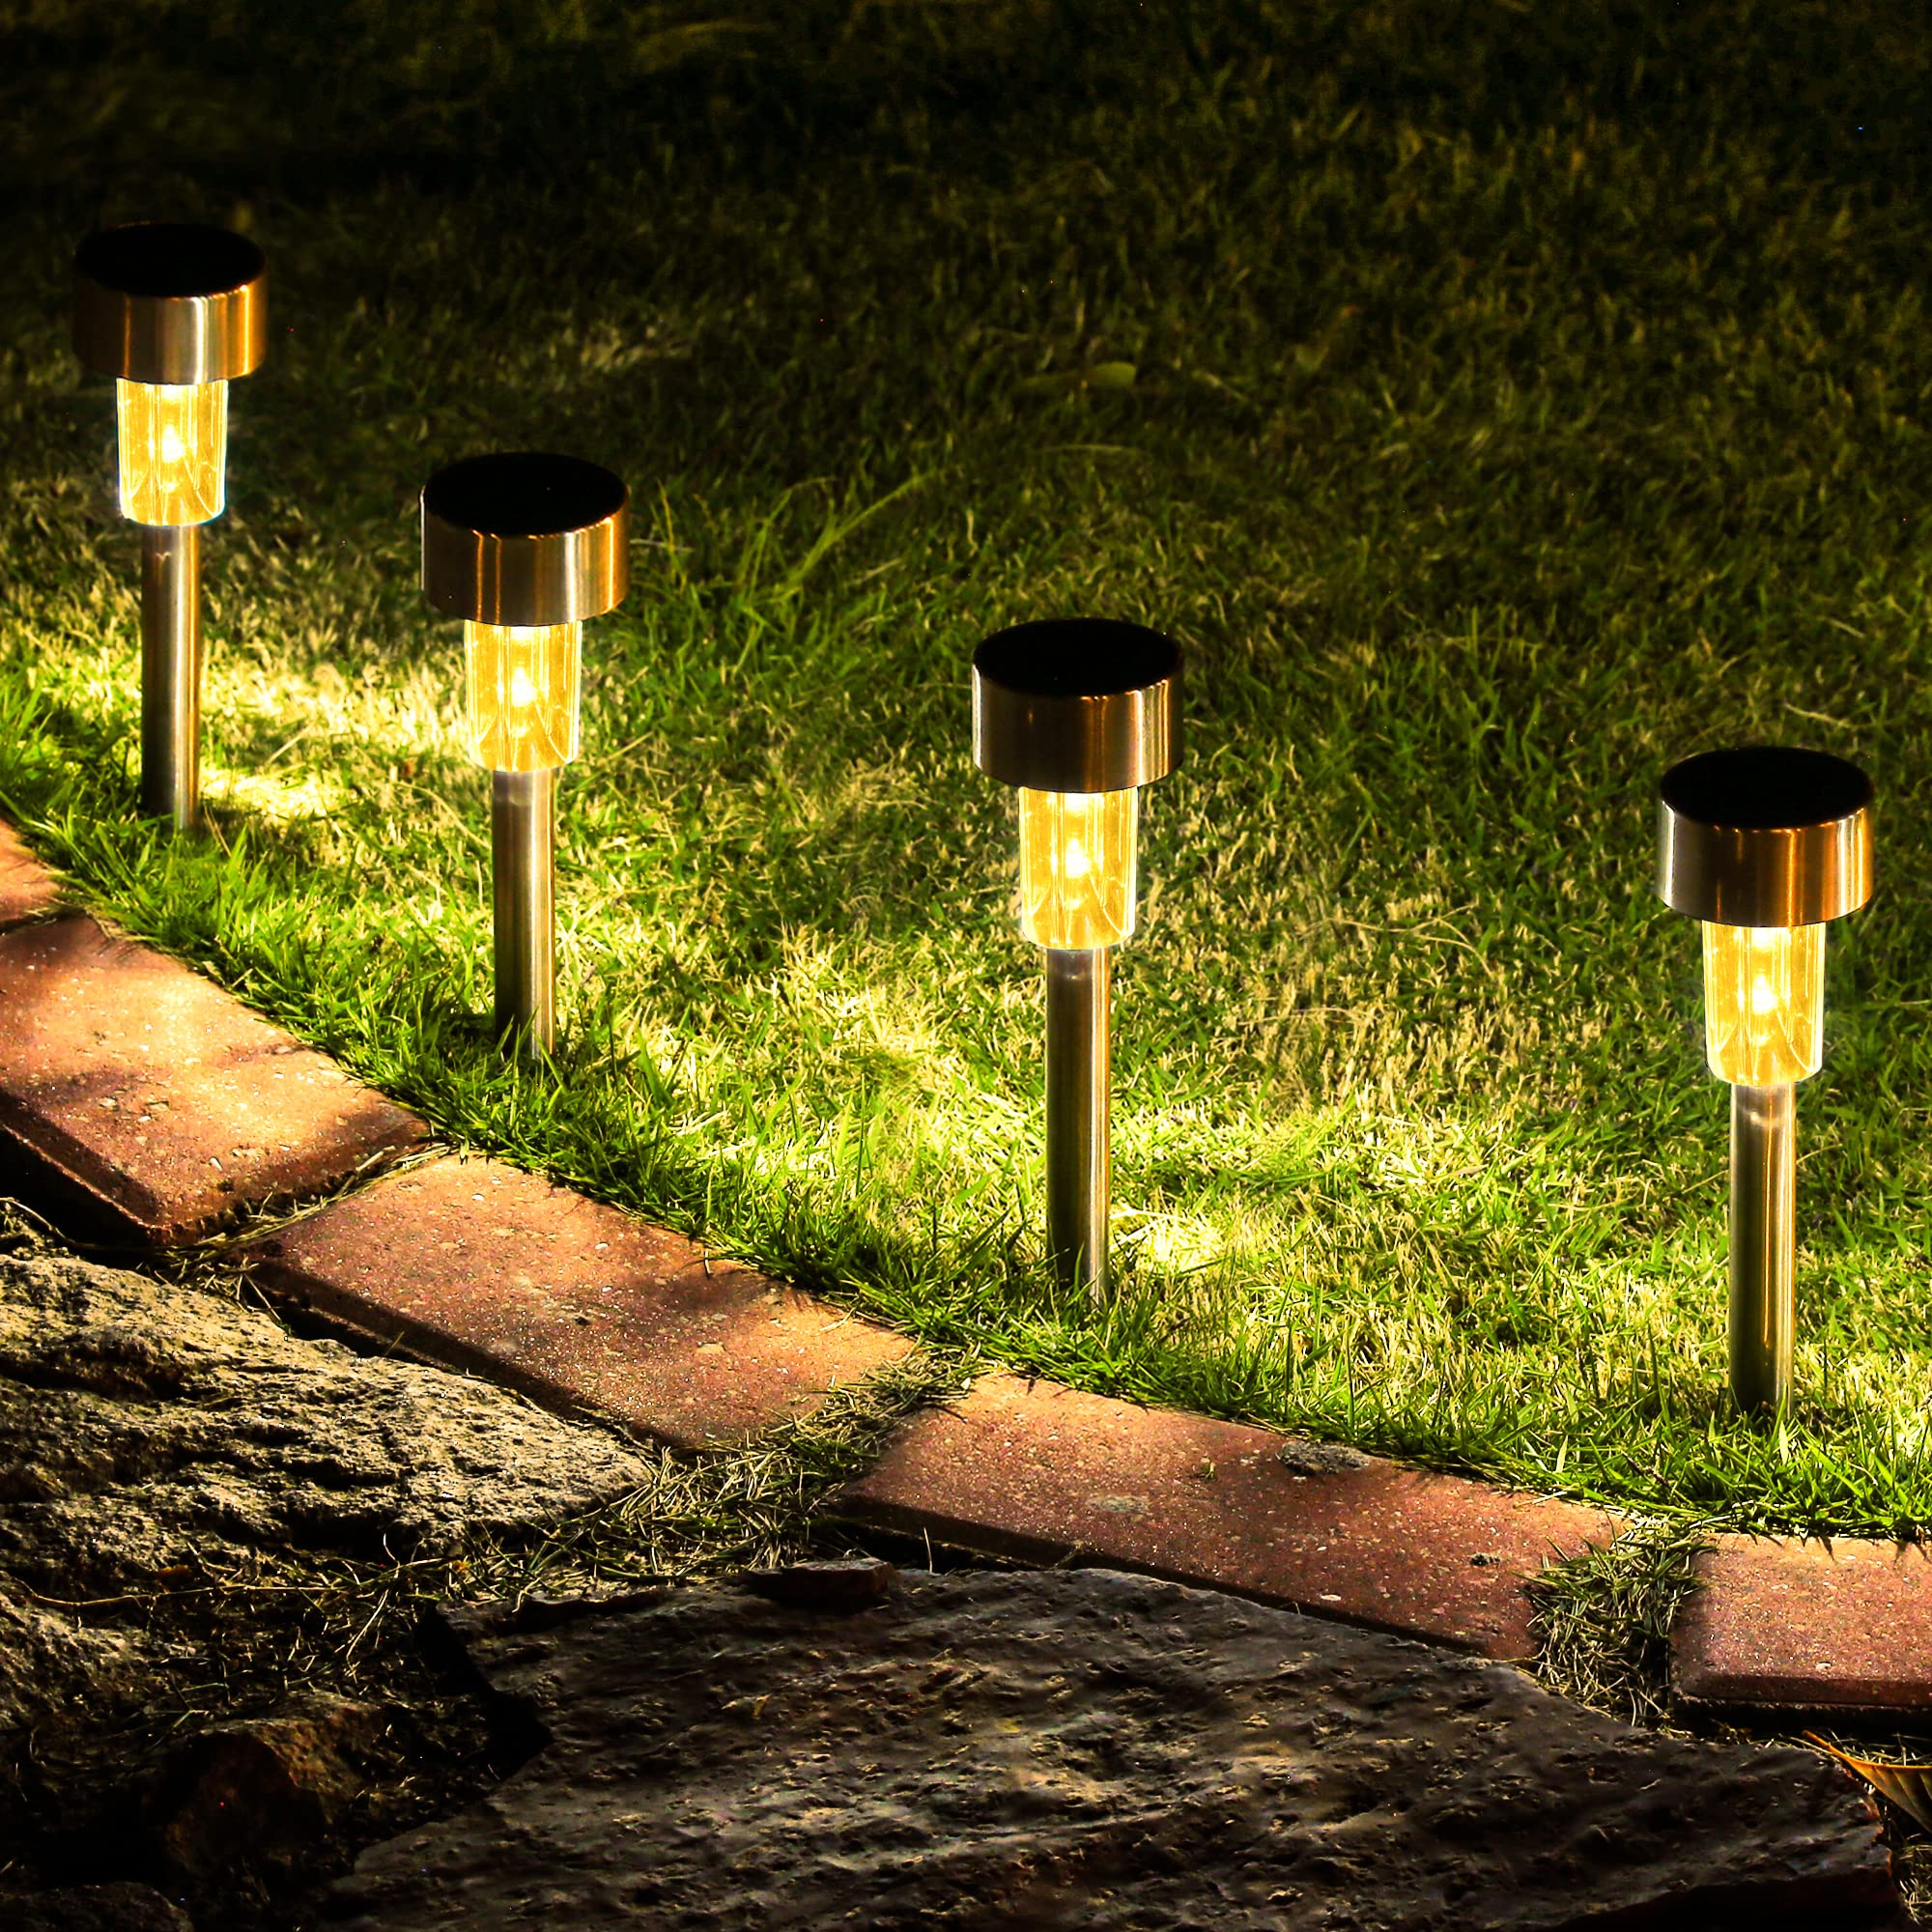 SOLPEX 16 Pack Solar Outdoor Lights Pathway, Stainless Steel Solar Lights Outdoor Waterproof,LED Landscape Lighting Solar Walkway Lights for Landscape/ Patio/Lawn/Yard/Driveway-Warm White